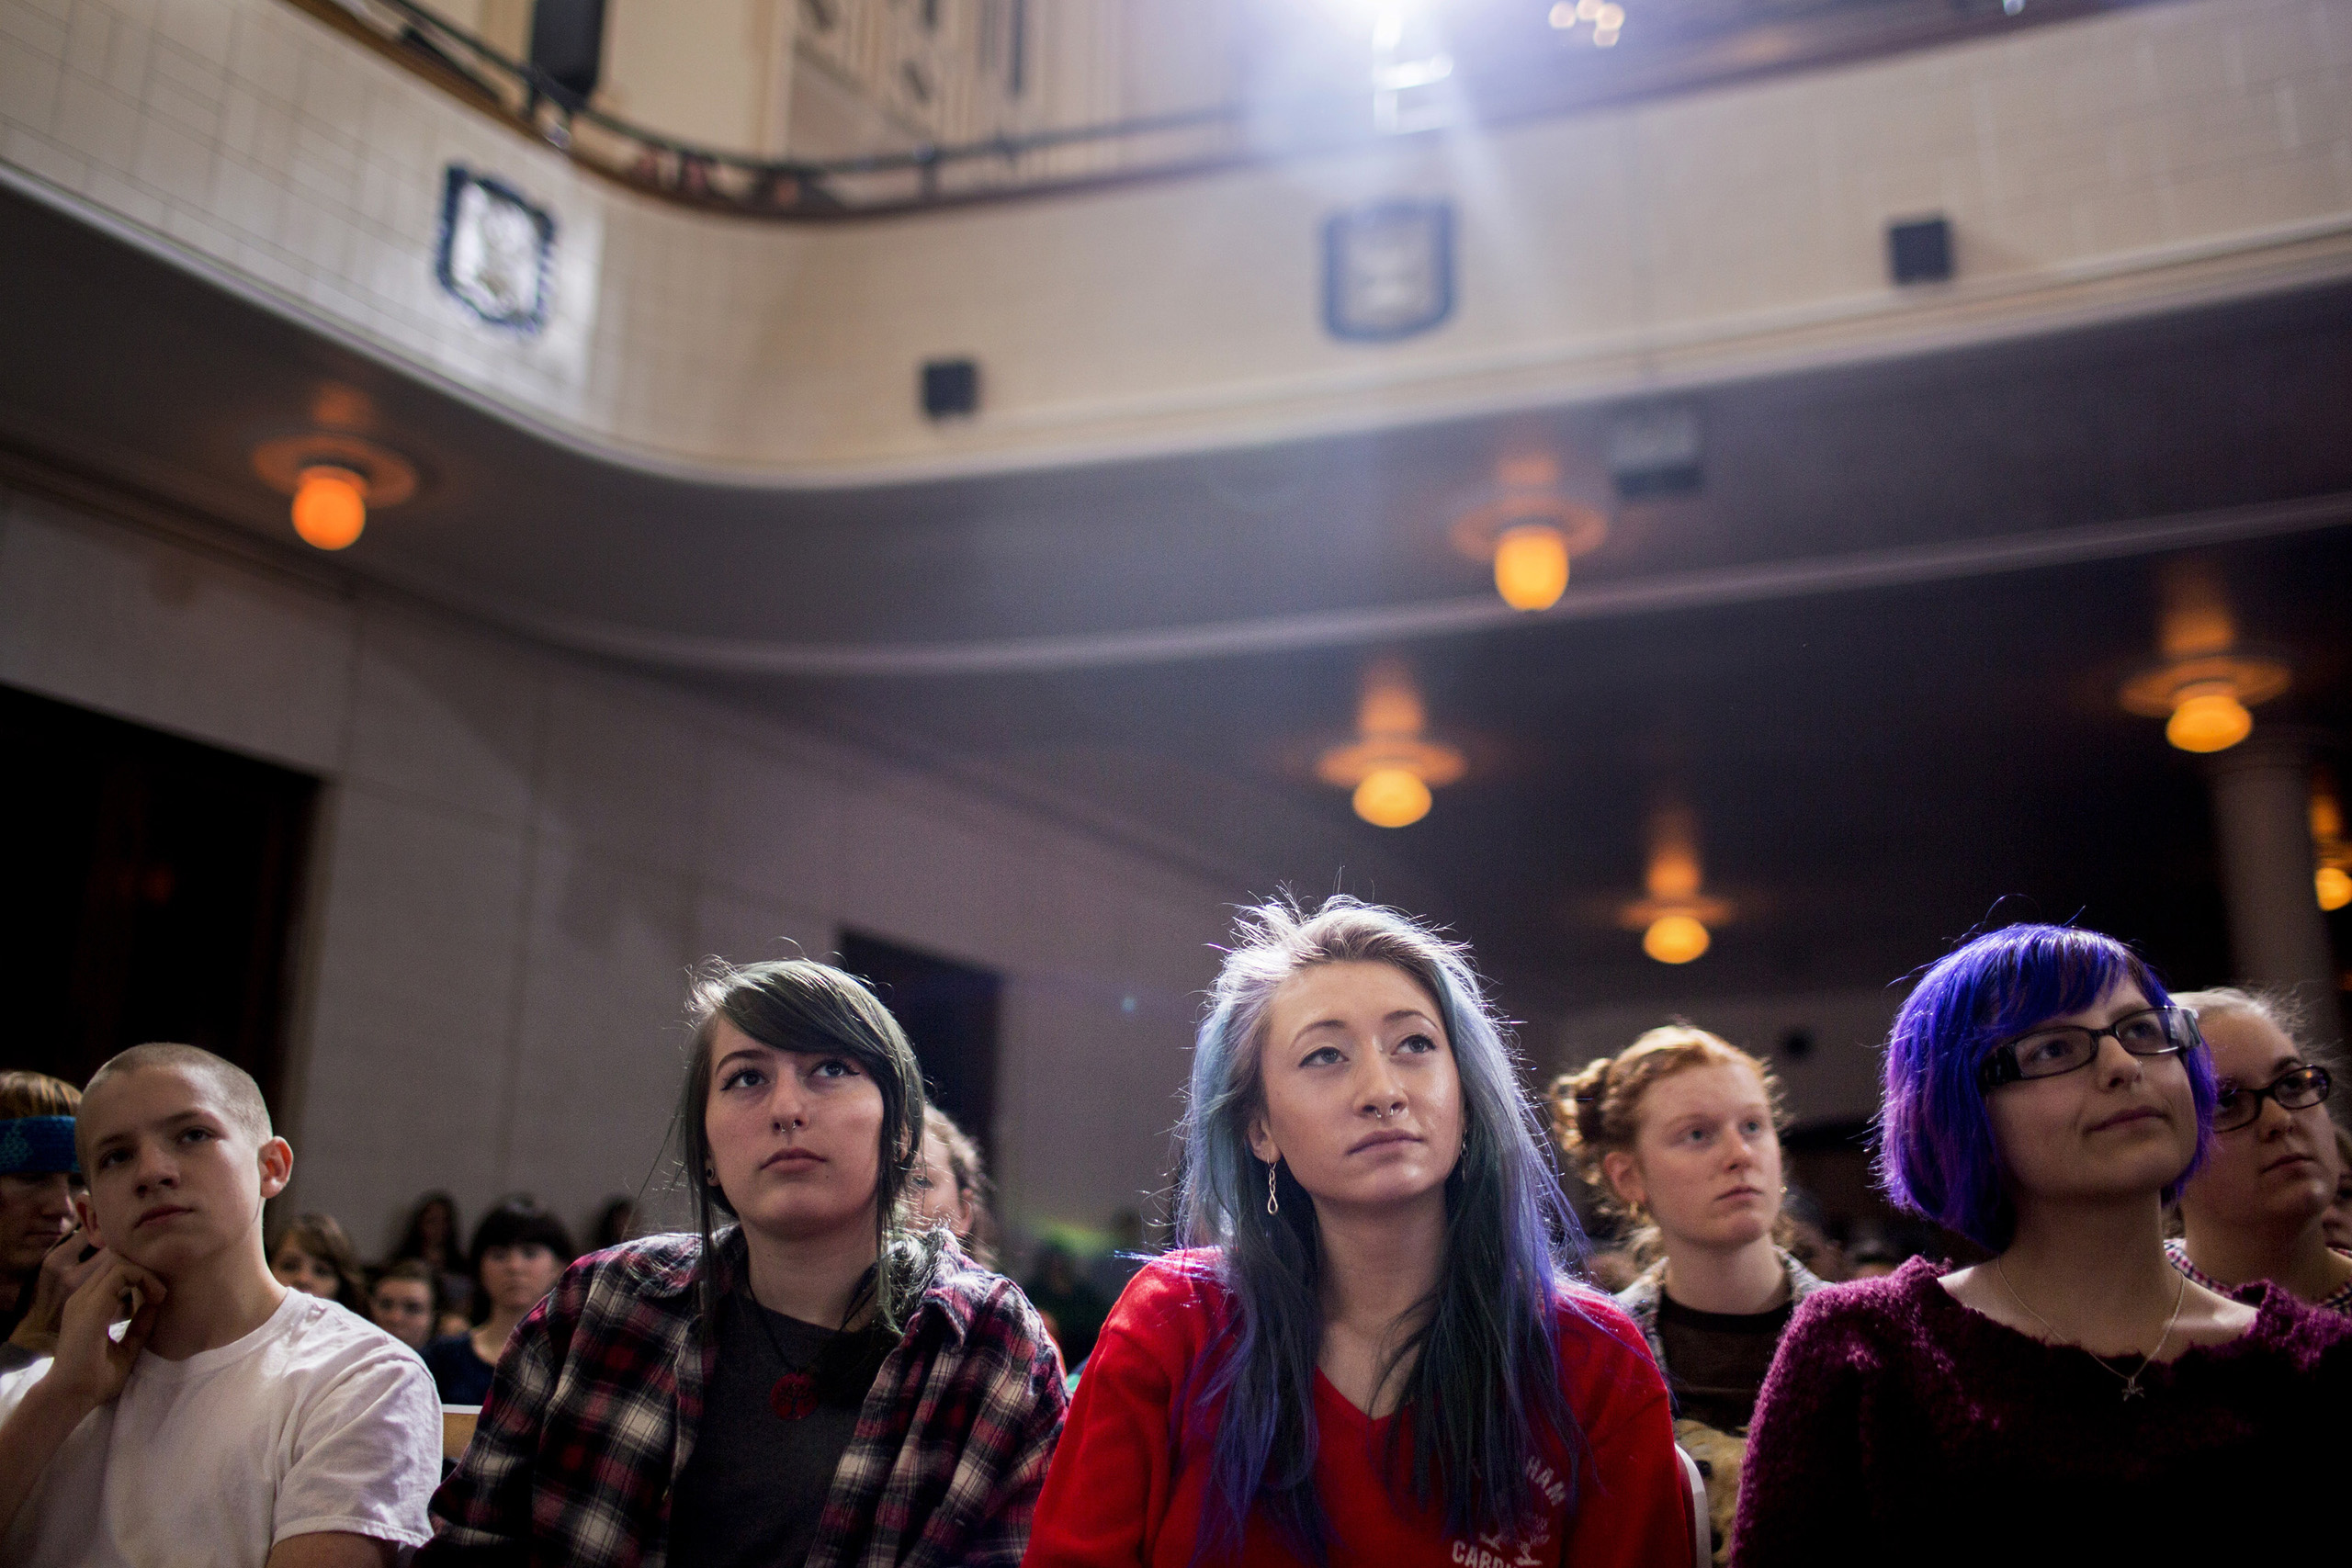 Students listen to Bernie Sanders during a stop at Roosevelt High School in Des Moines, Iowa, on Jan. 28, 2016.